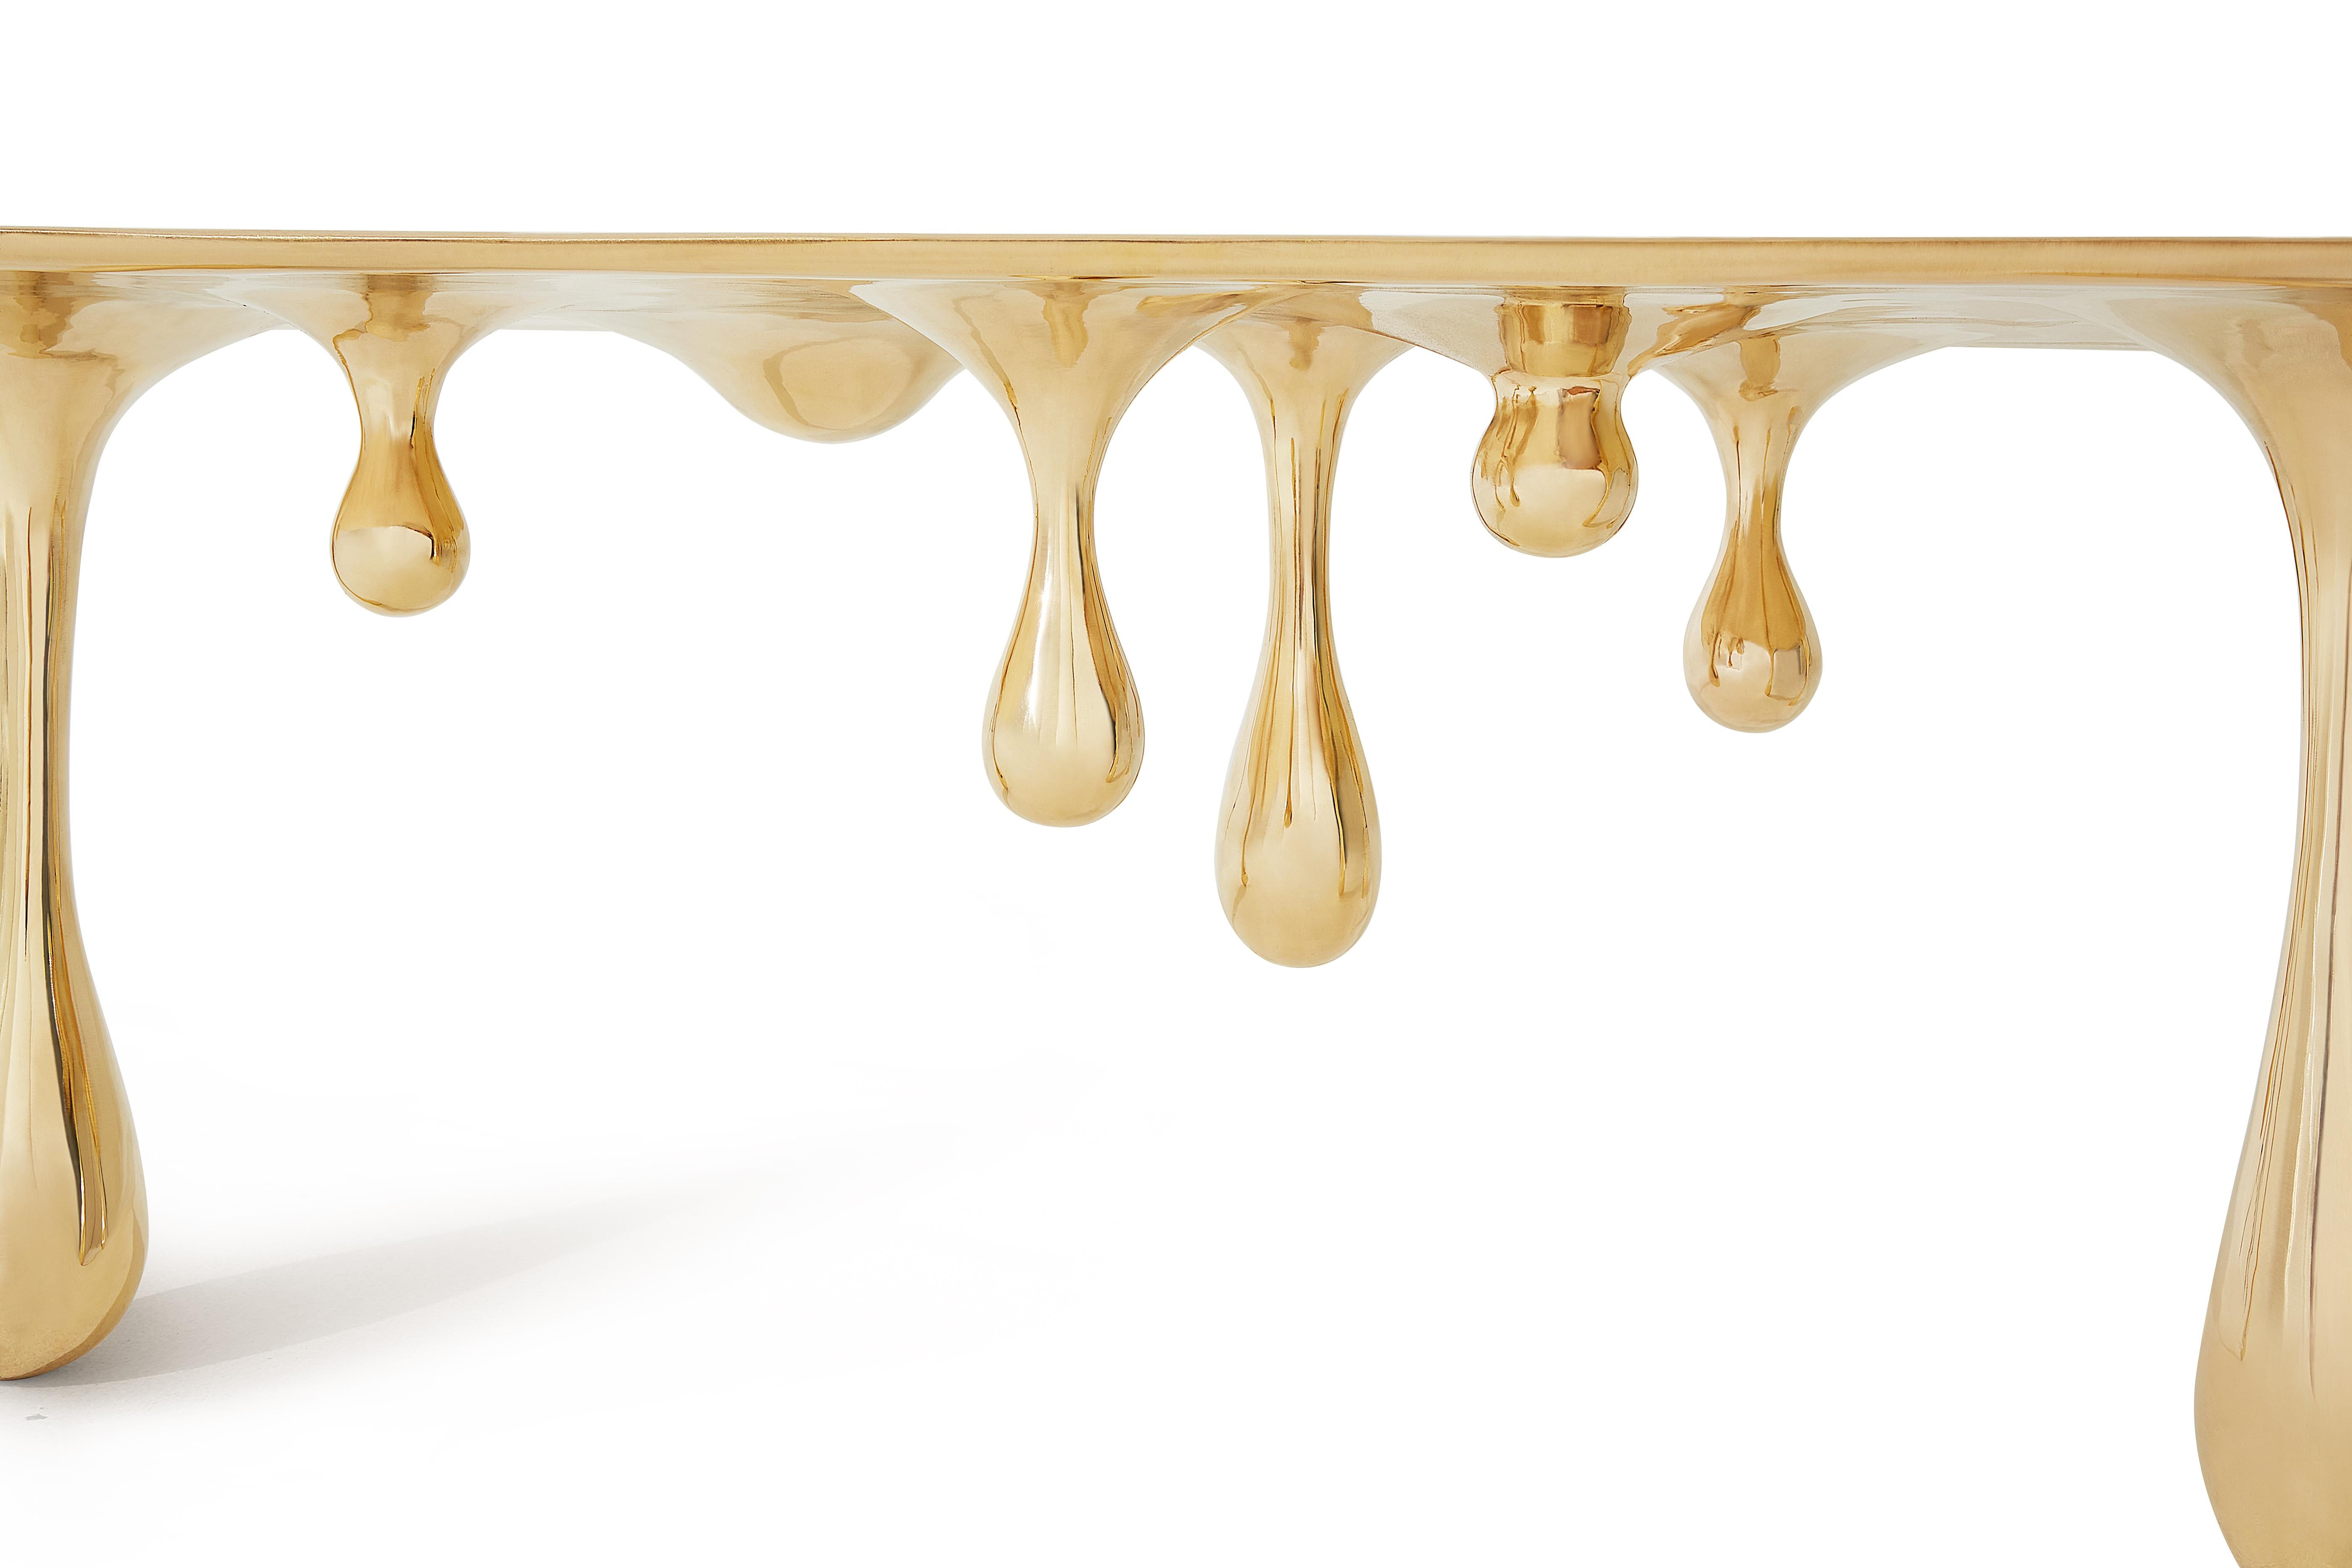 Chinese Melting Coffee Table/Cocktail Table 'Bean Shape' Polished Brass by Zhipeng Tan For Sale